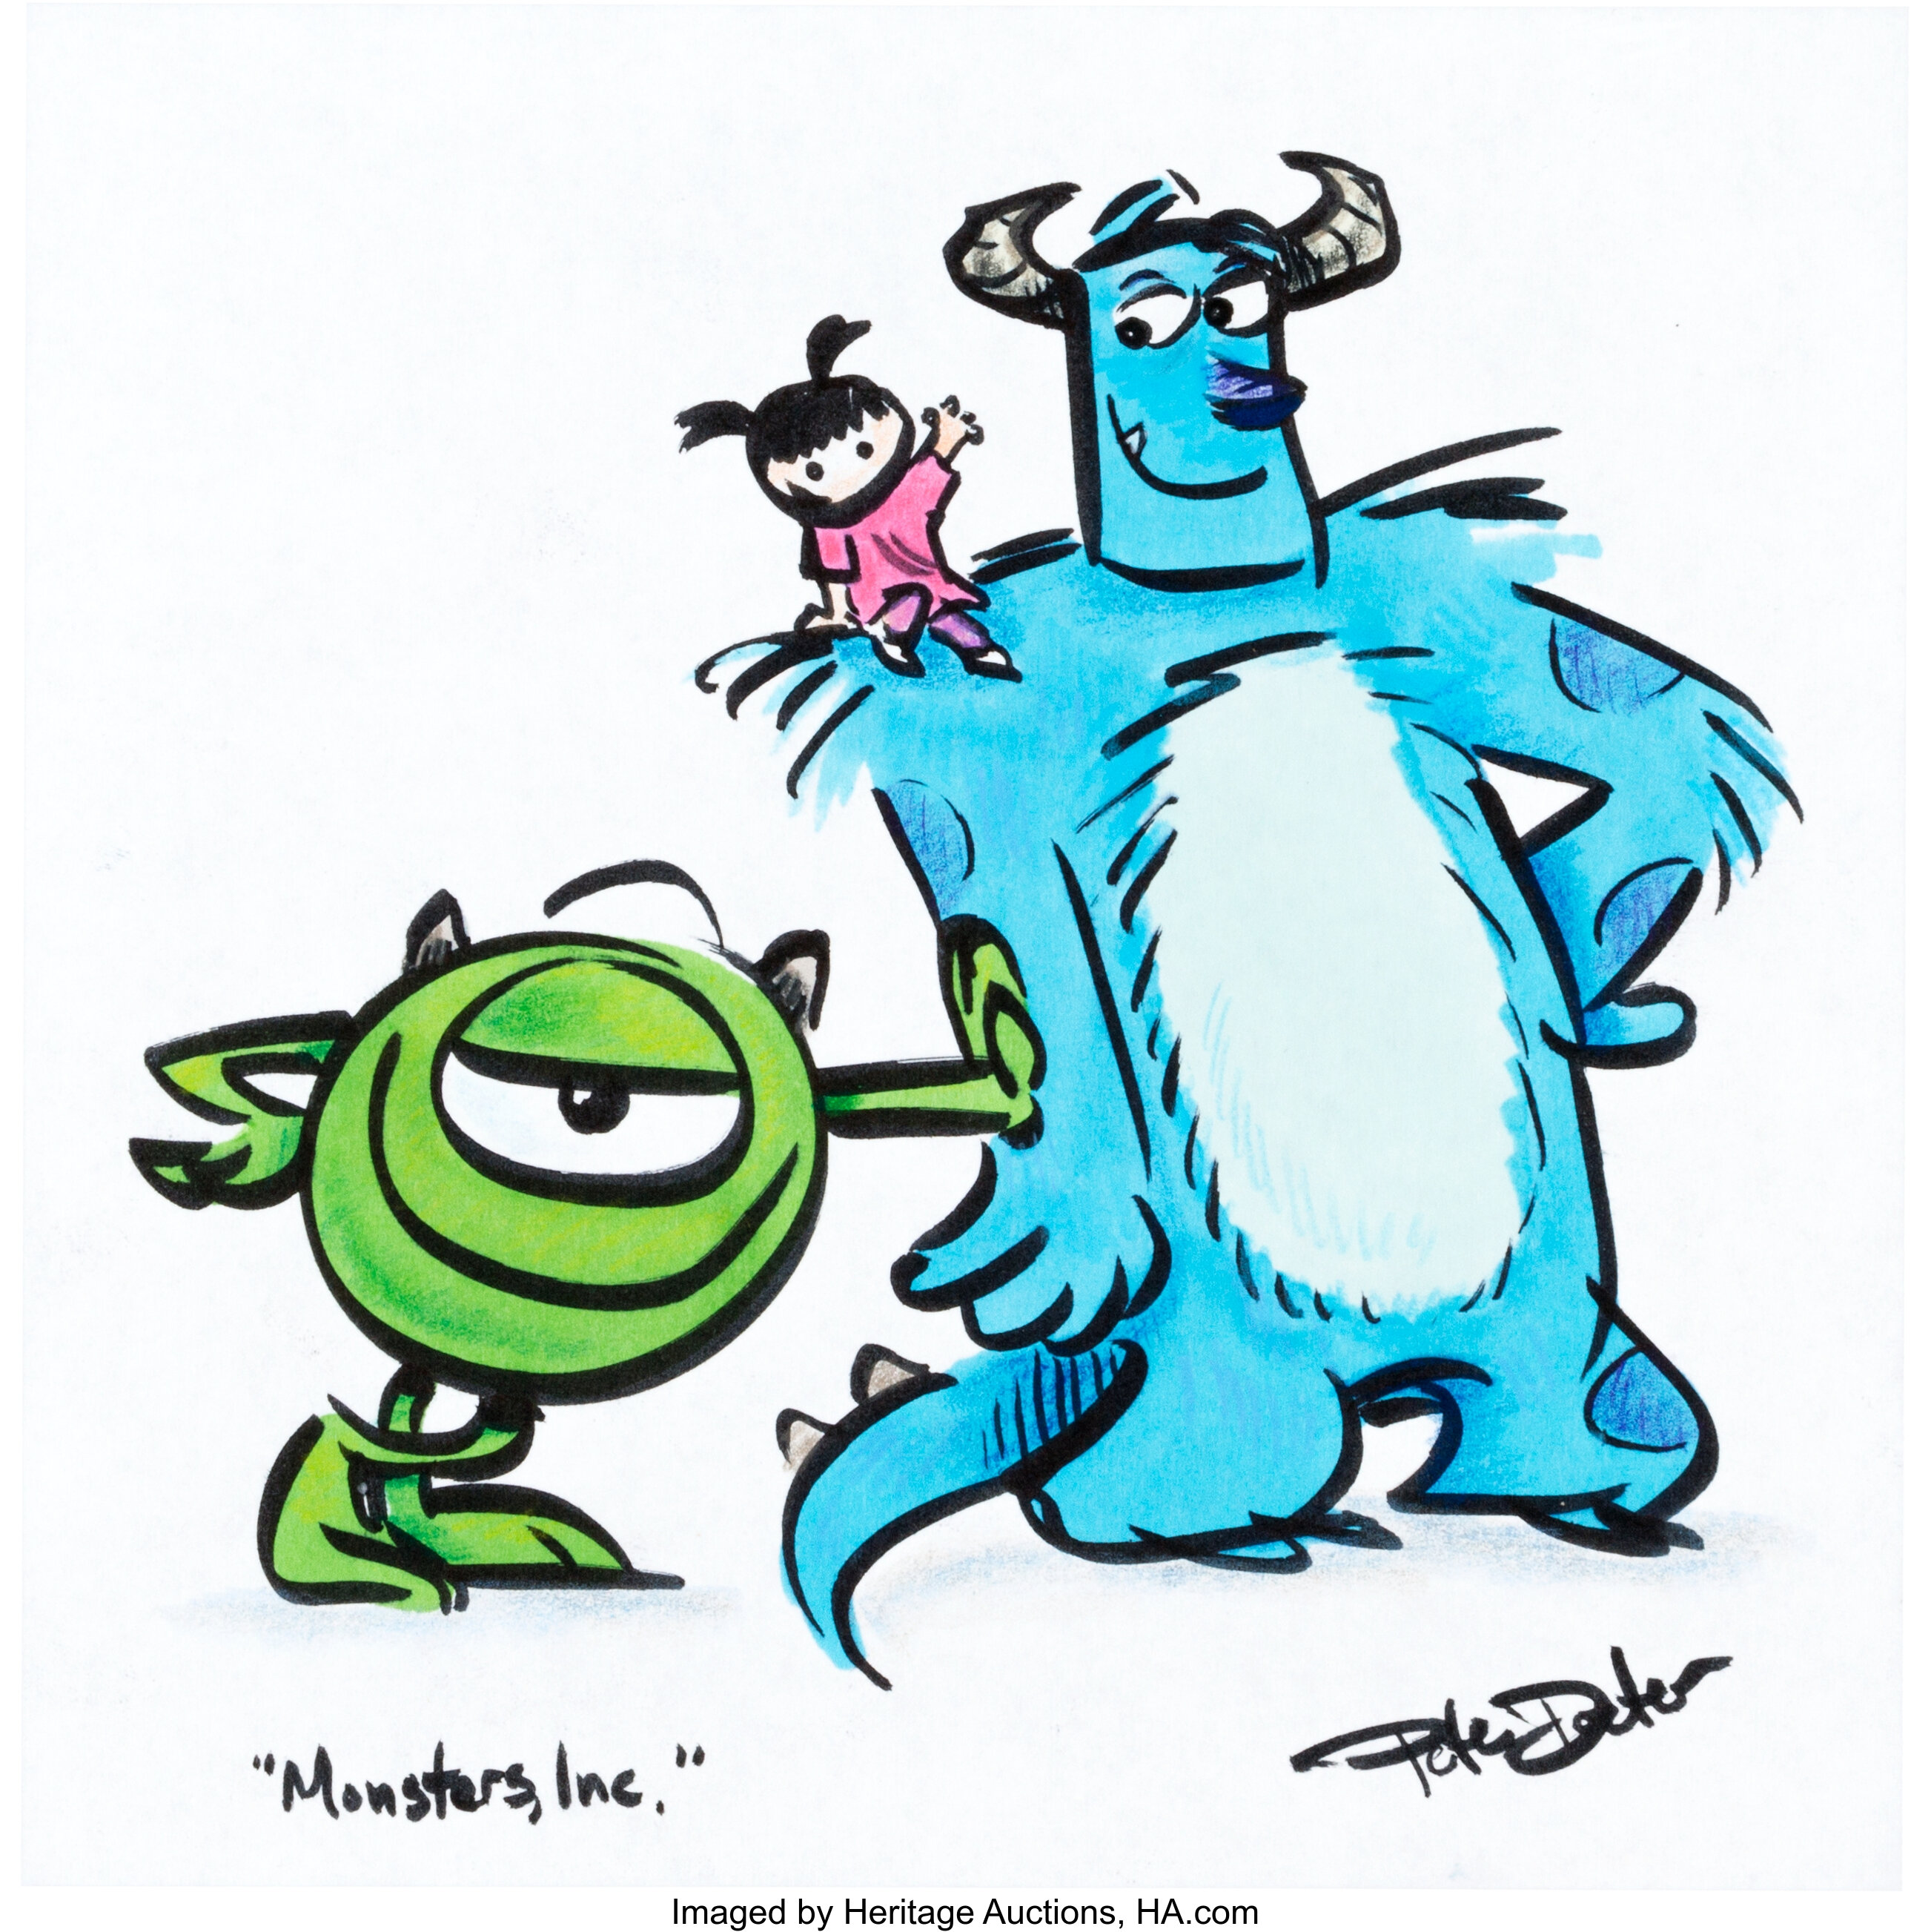 Monsters Inc Sully Mike Wazowski And Boo Sketch By Peter Docter Lot 95201 Heritage Auctions